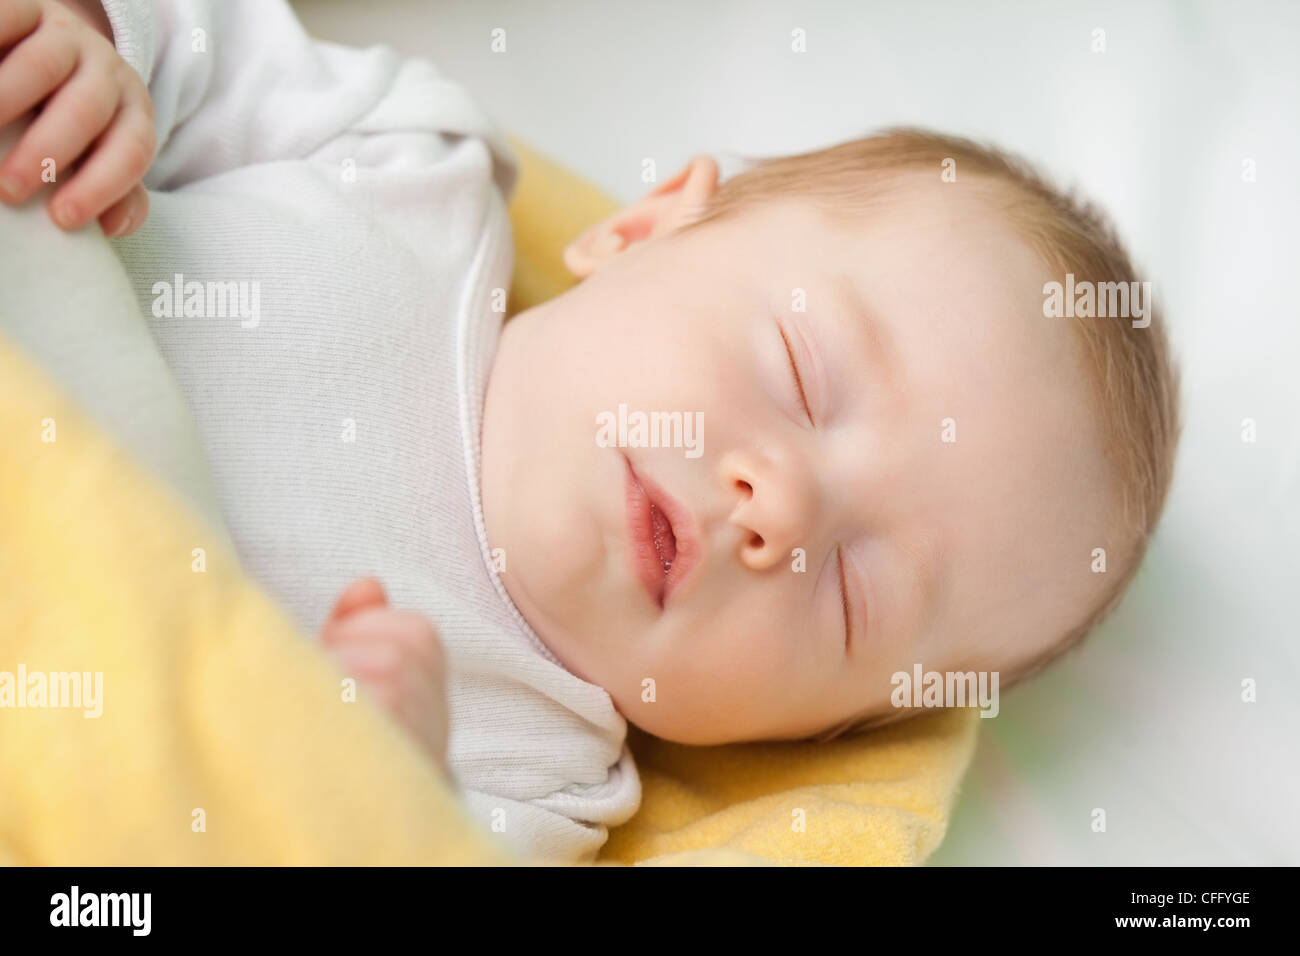 Cute baby taking a nap Stock Photo